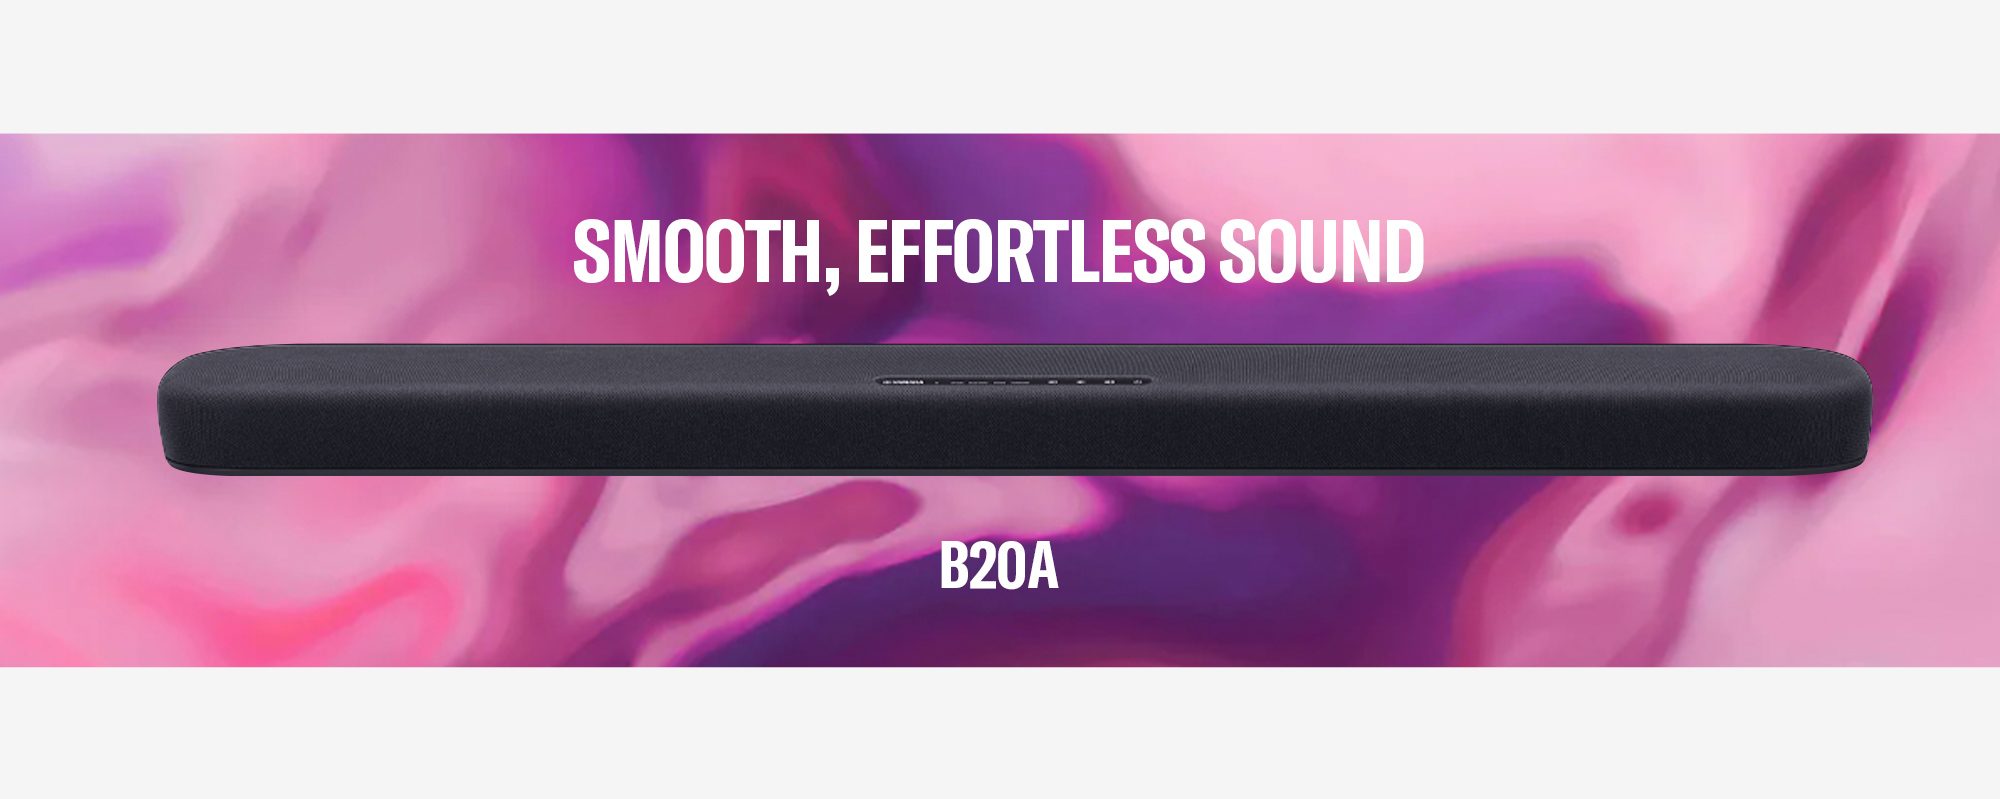 SR-B20A - Features - Sound Bars - Audio & Visual - Products 